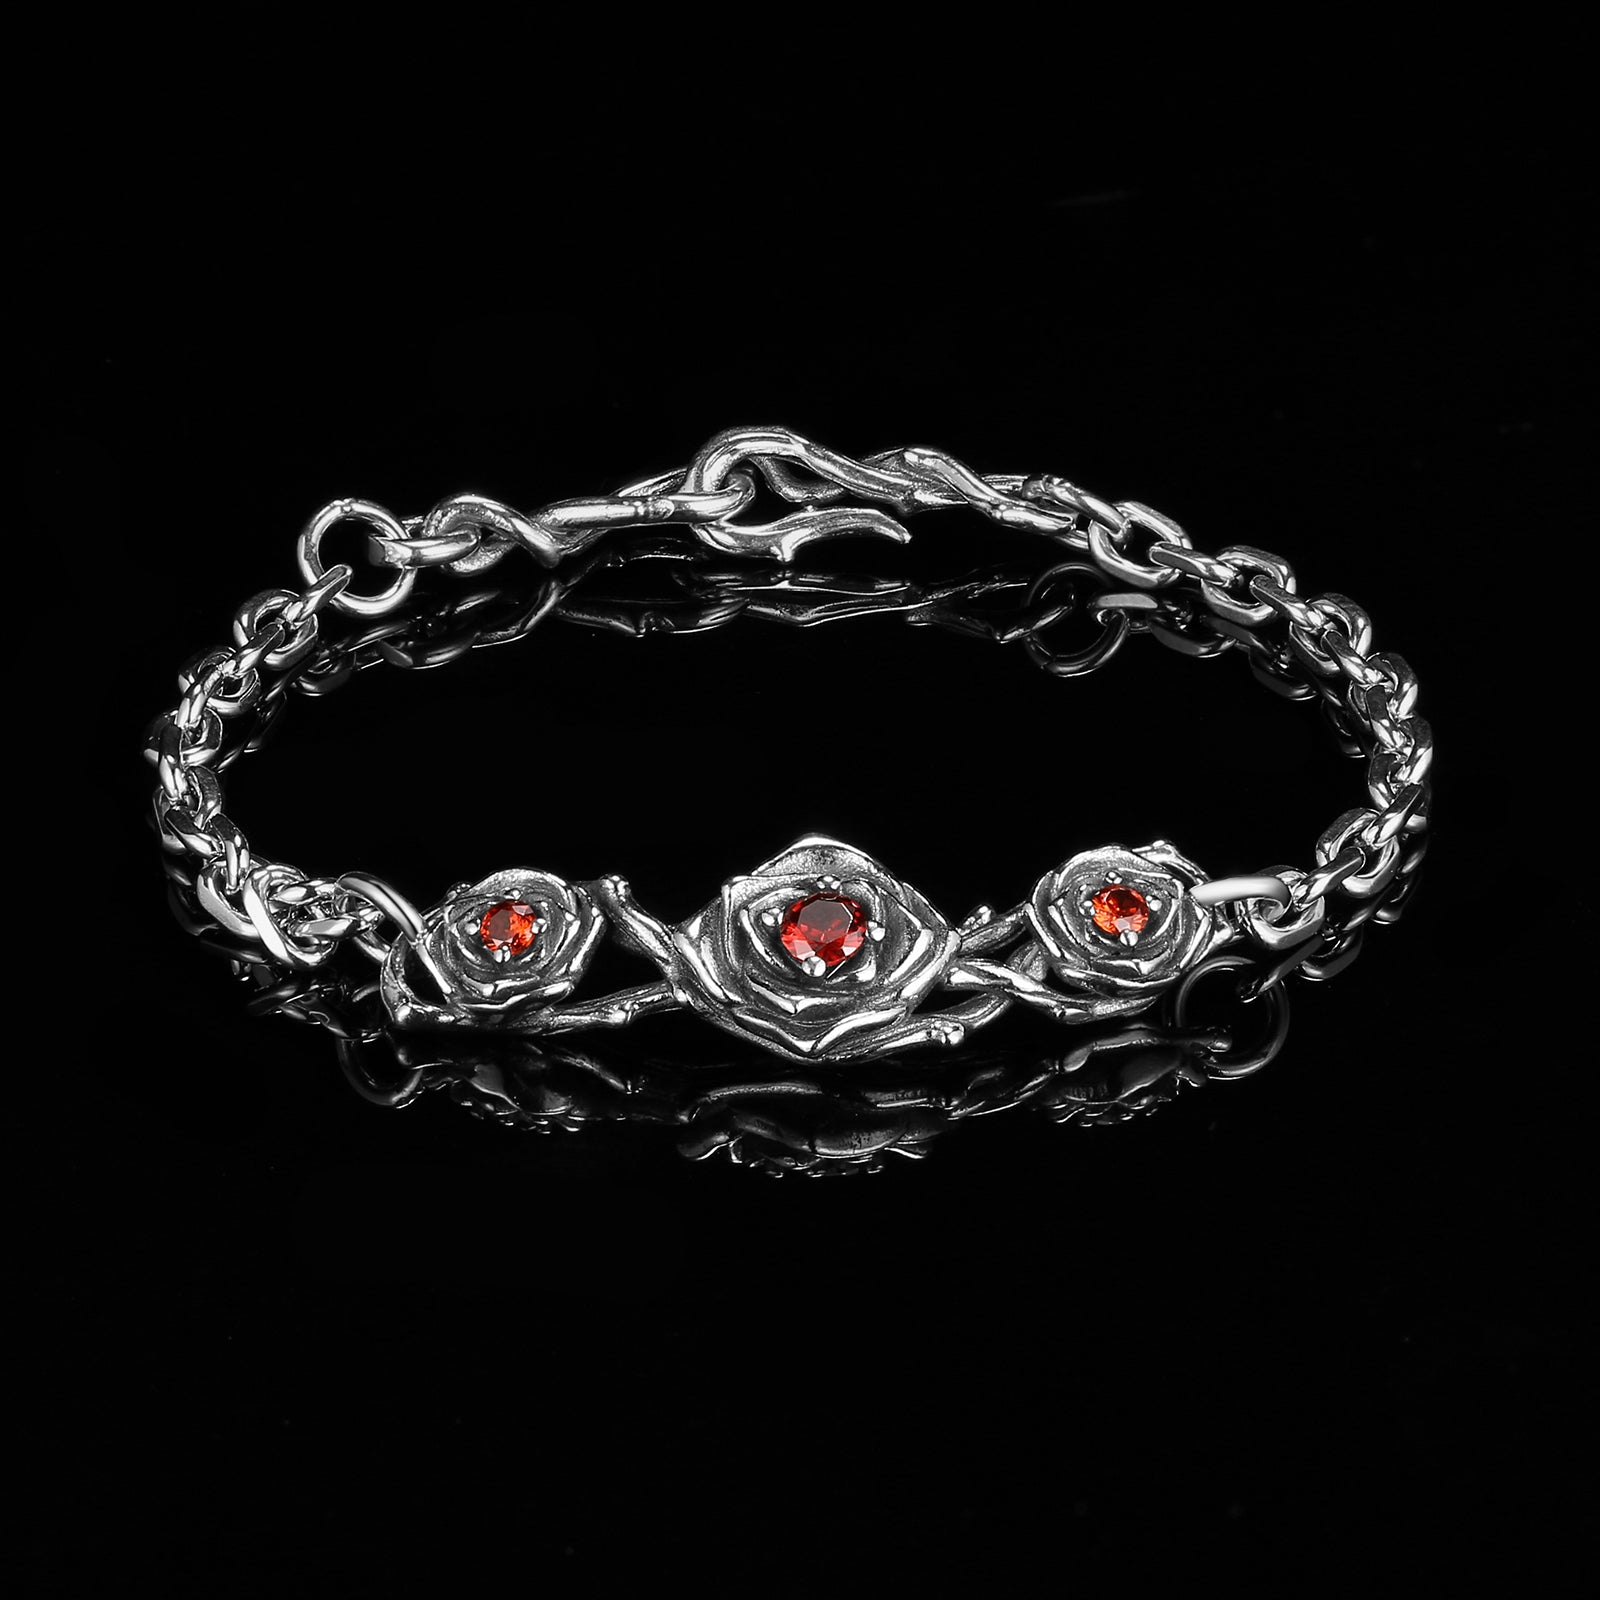 RED ROSES ARMBAND. - 925 ZILVER